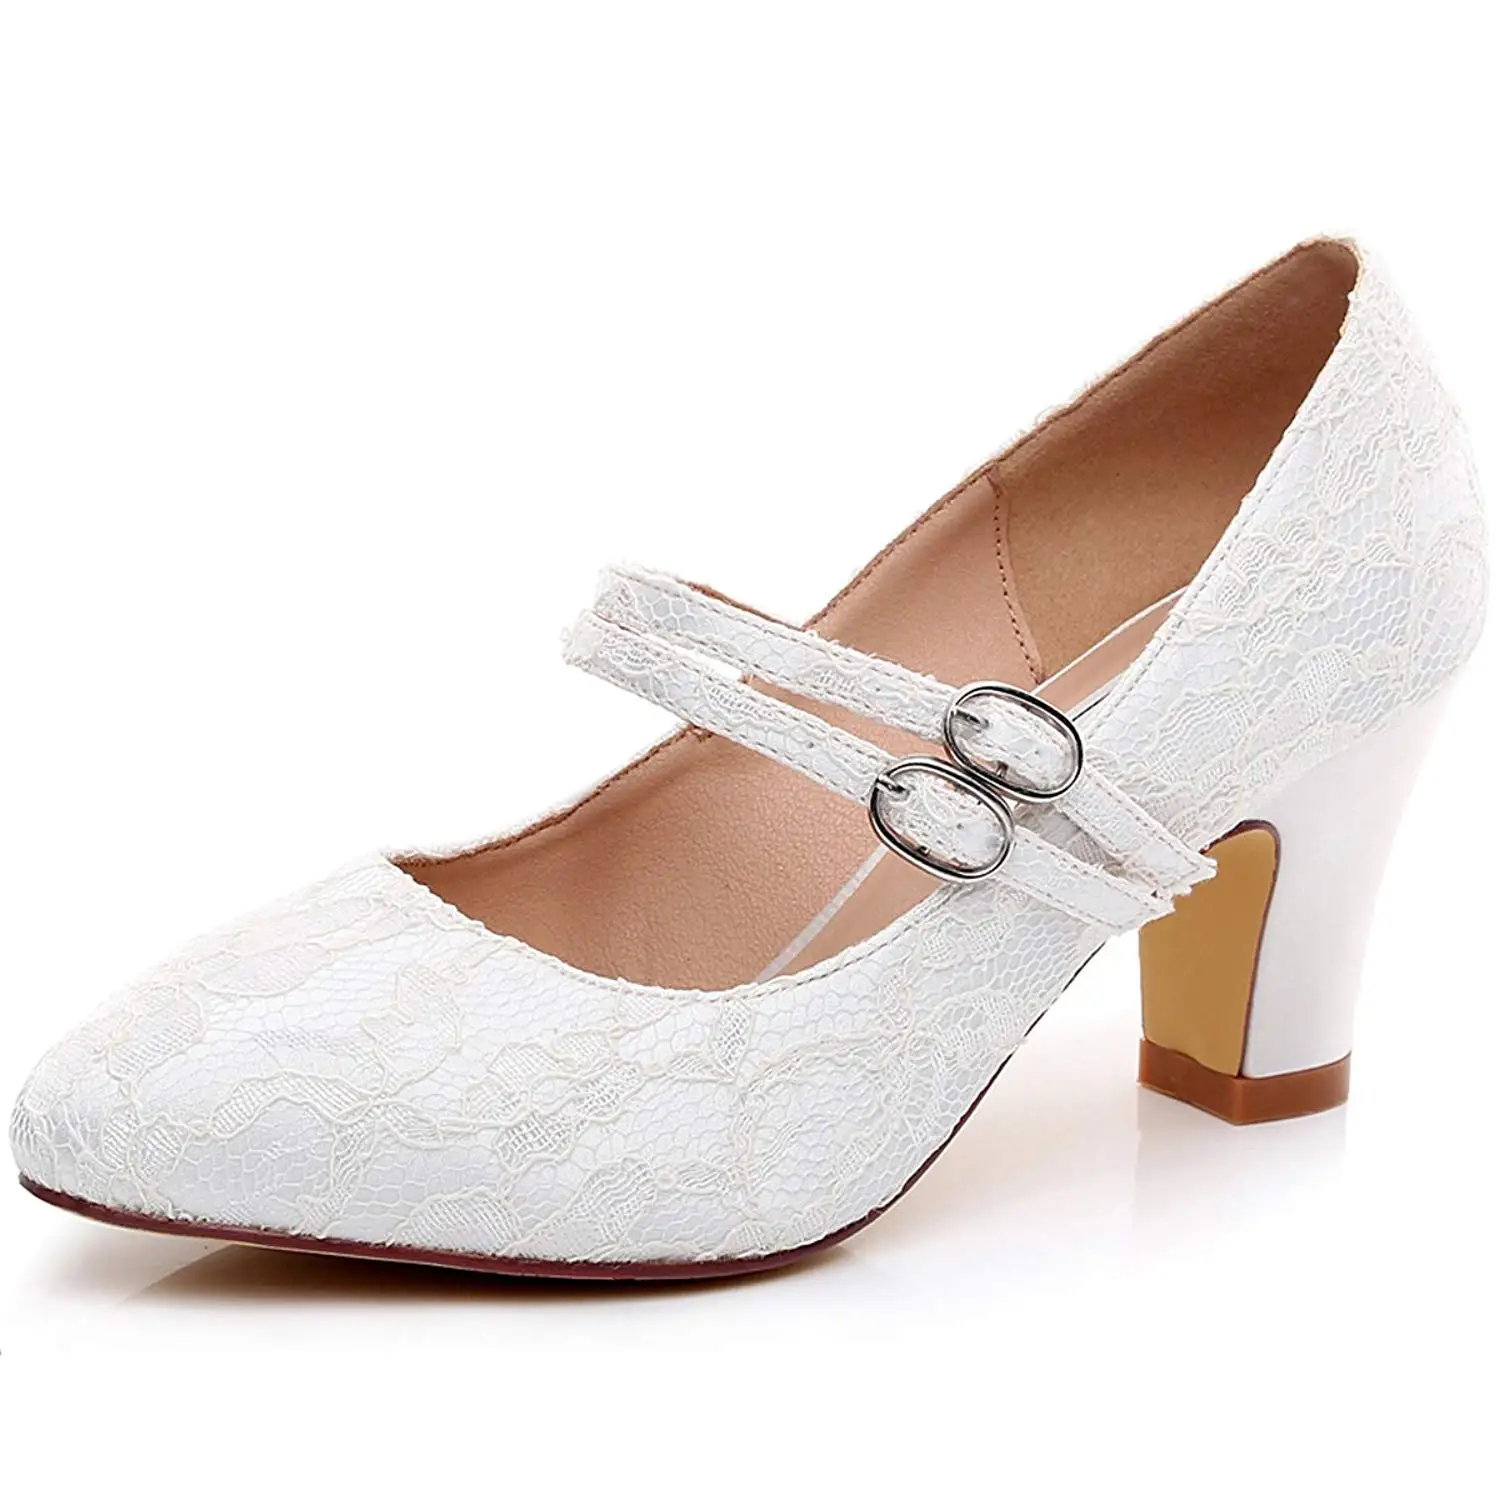 2.5 inch bridal shoes